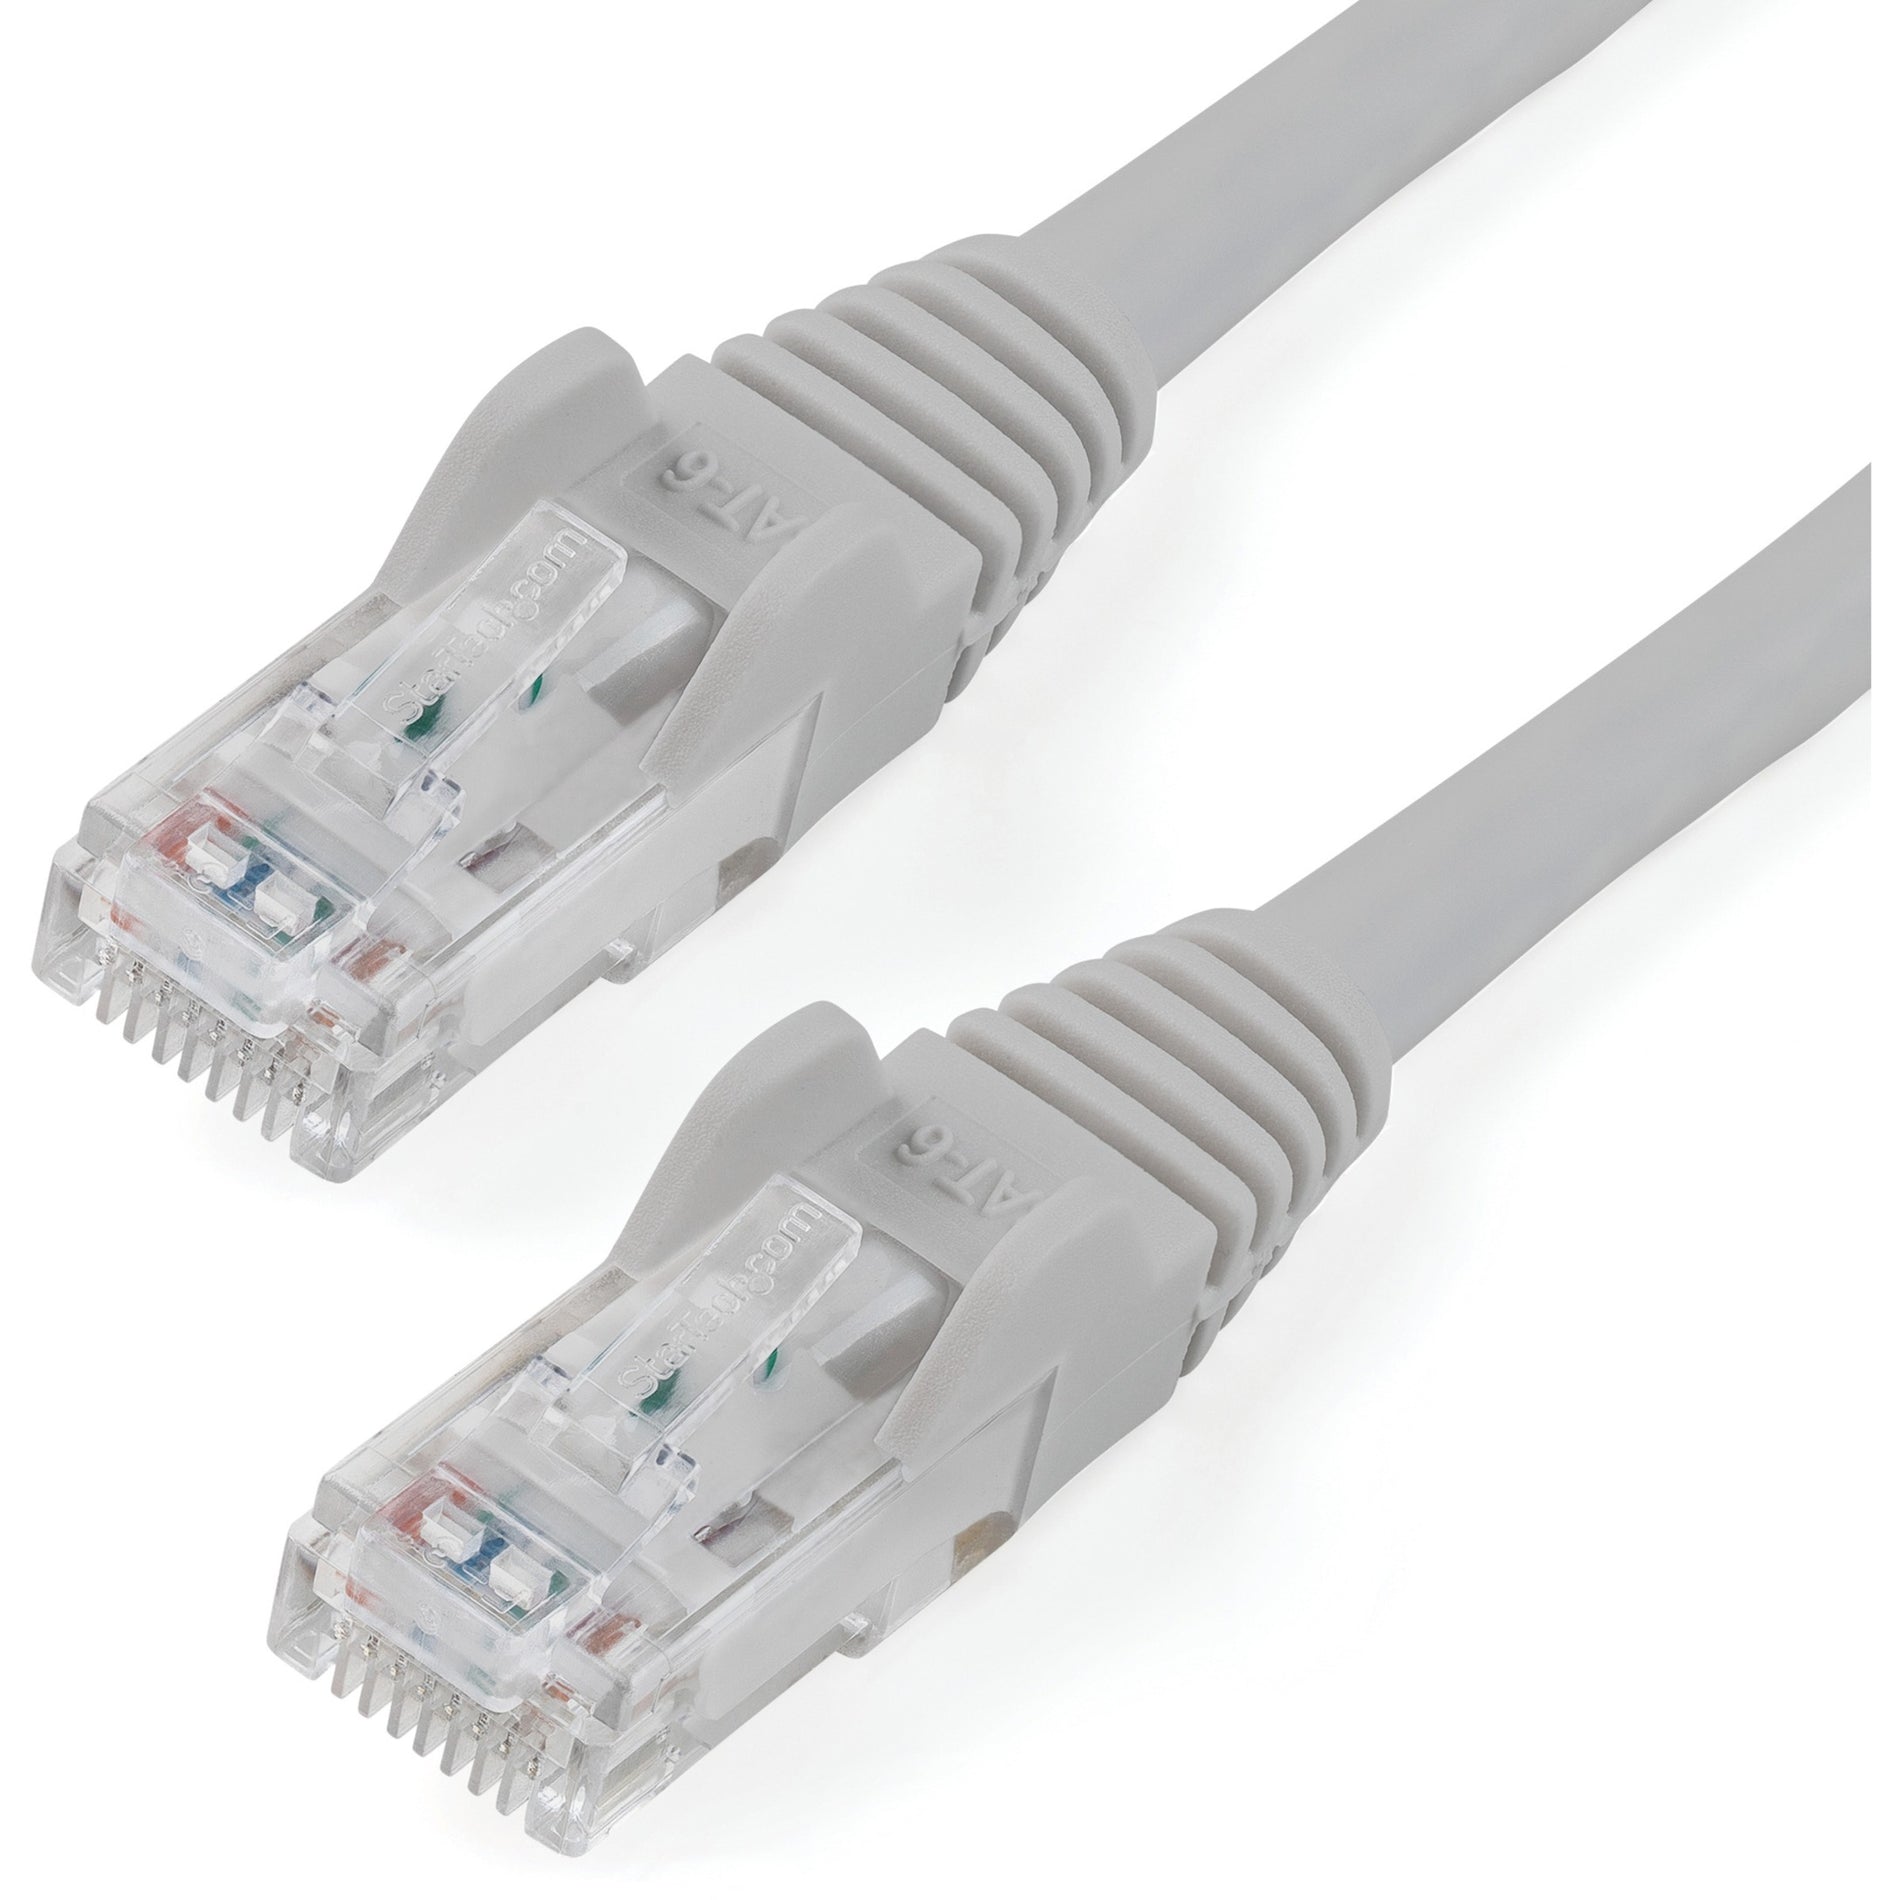 StarTech.com N6PATCH75GR 75 ft. Cat6 Patch Cable - Gray, Lifetime Warranty, Snagless, 10 Gbit/s Data Transfer Rate